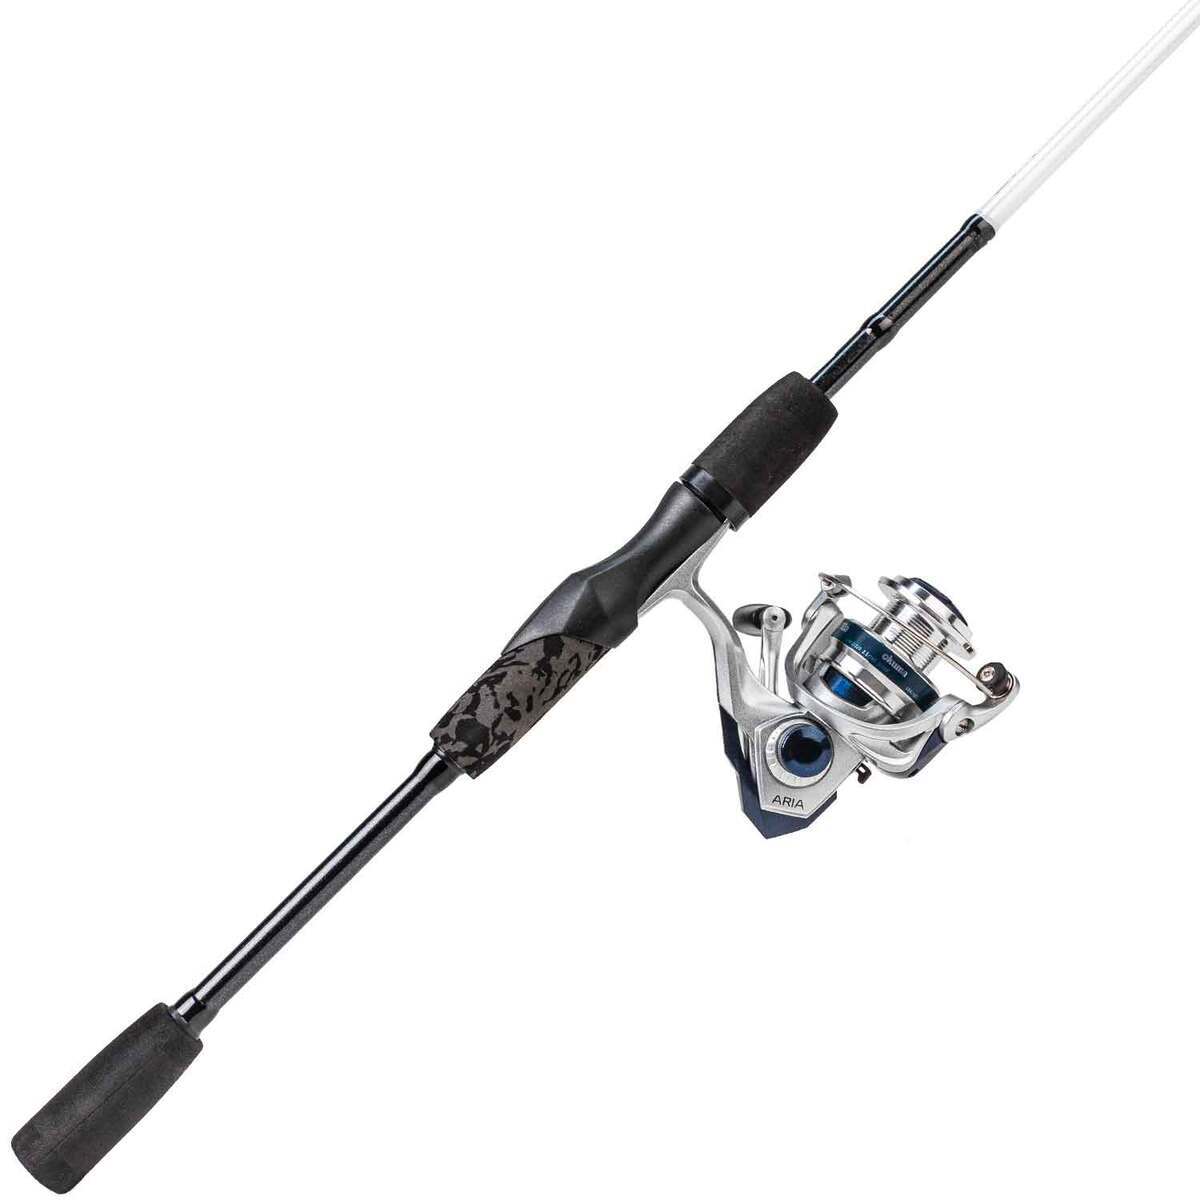 1.8m-2.7m lure Rod Reel Combos carbon Spinning Fishing rod and reel set  Trout Novice Travel vara de pesca com molinete Portable - AliExpress